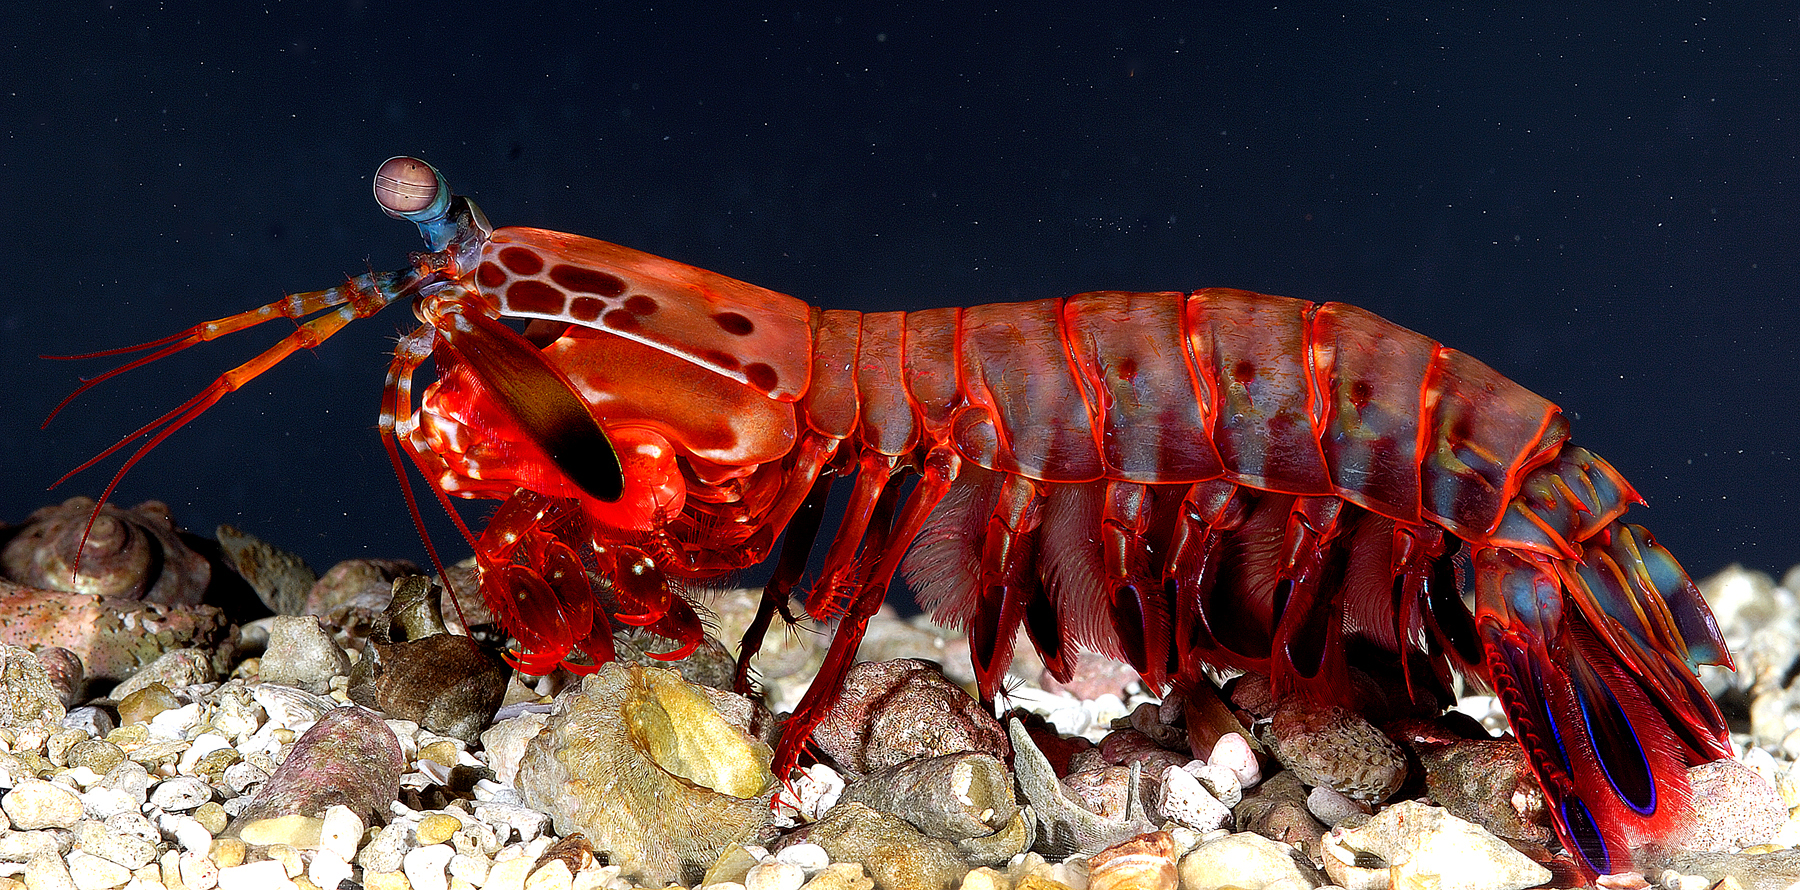 4 Reasons Why Mantis Shrimp is the Deadliest Creature in the Ocean